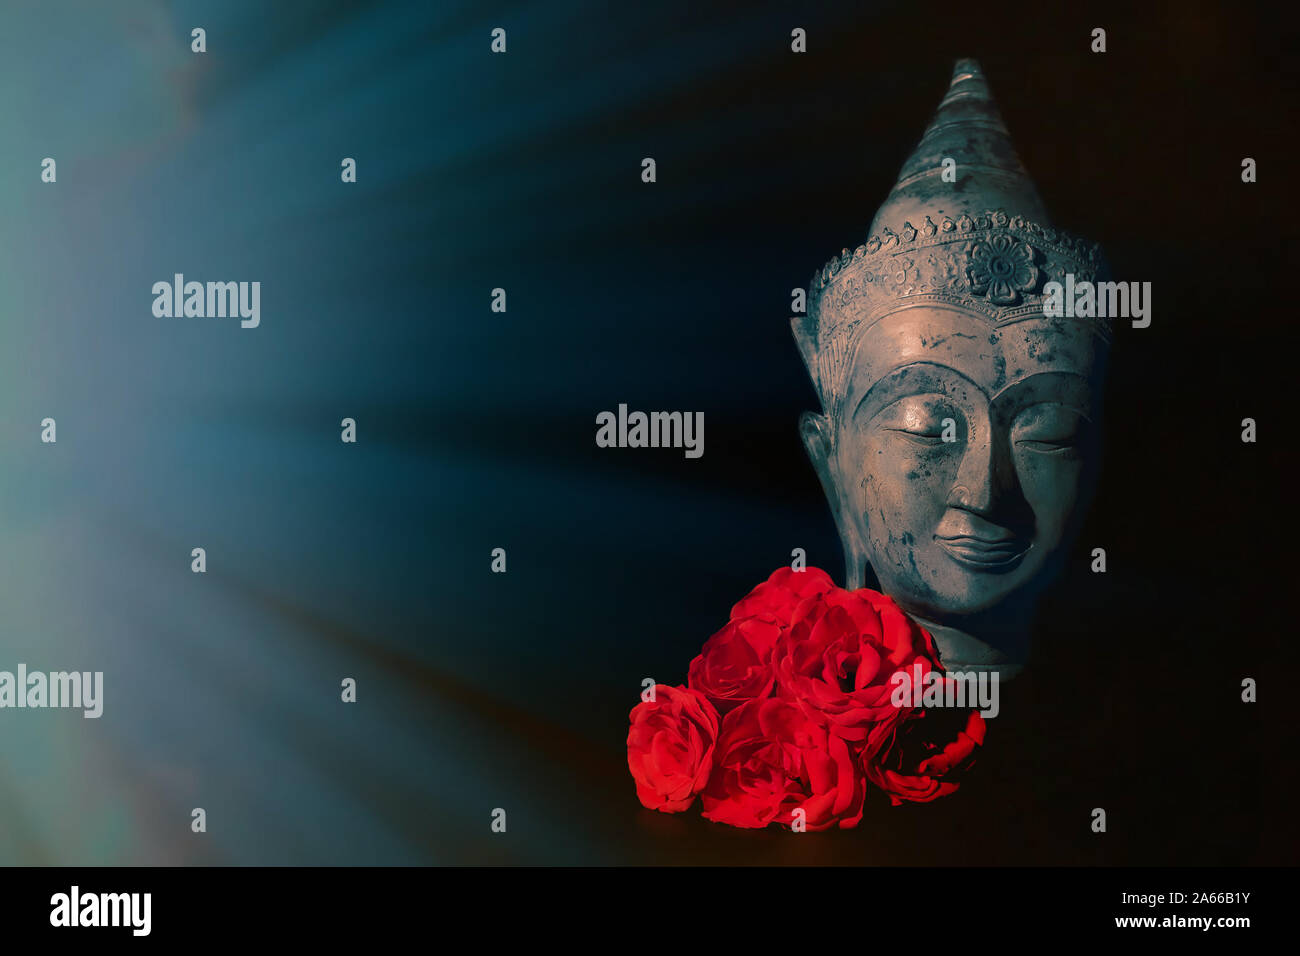 Peace and love. Traditional meditating Buddha head with red roses isolated on black background with copyspace. Beautiful peaceful image. Calm Buddhist Stock Photo